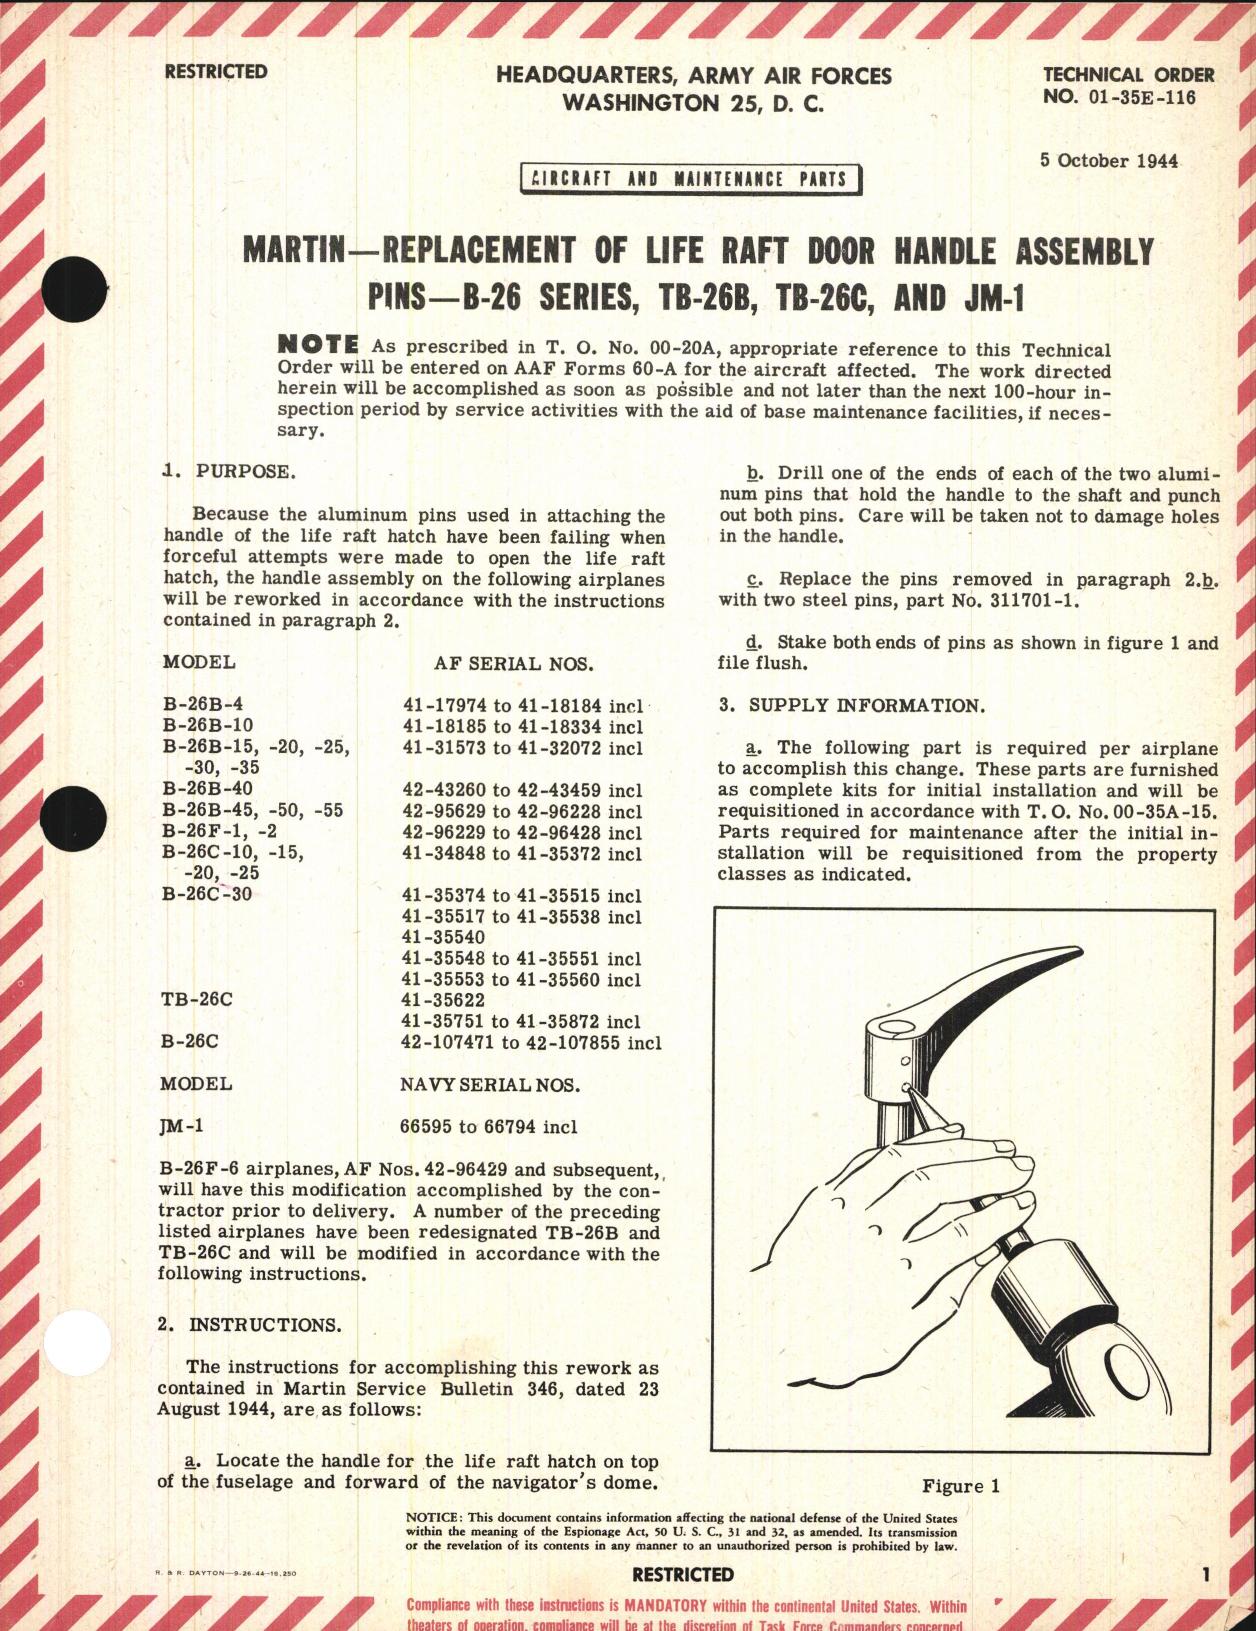 Sample page 1 from AirCorps Library document: Replacement of Life Raft Door Handle Assembly Pins for B-26 Series, TB-26B, TB-26C, and JM-1